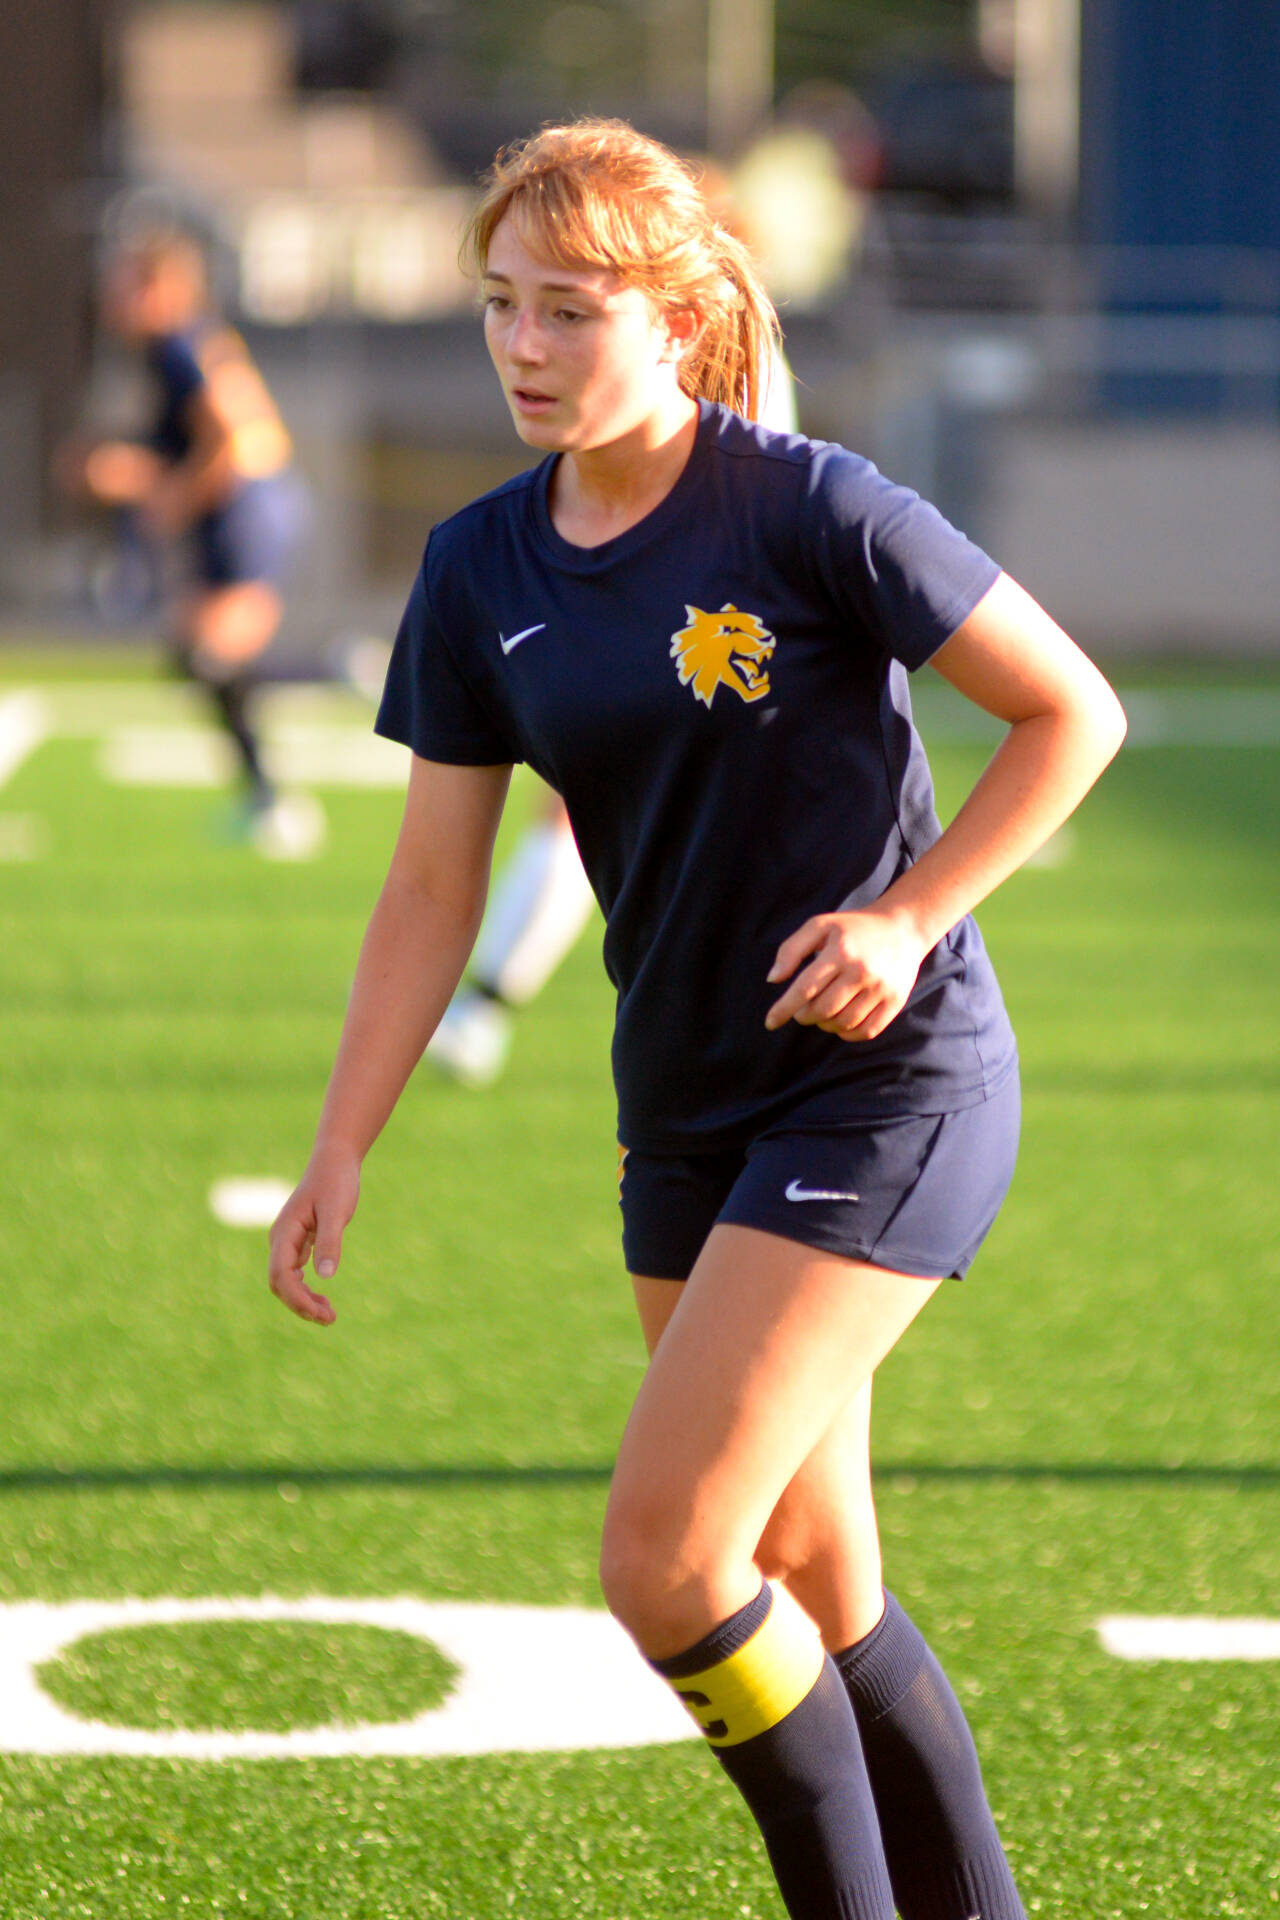 DAILY WORLD FILE PHOTO Aberdeen senior midfielder Zoe Troeh, seen here in a file photo from Sept. 9, was named to the 2A Evergreen Conference’s First Team as a midfielder for the 2023 season.